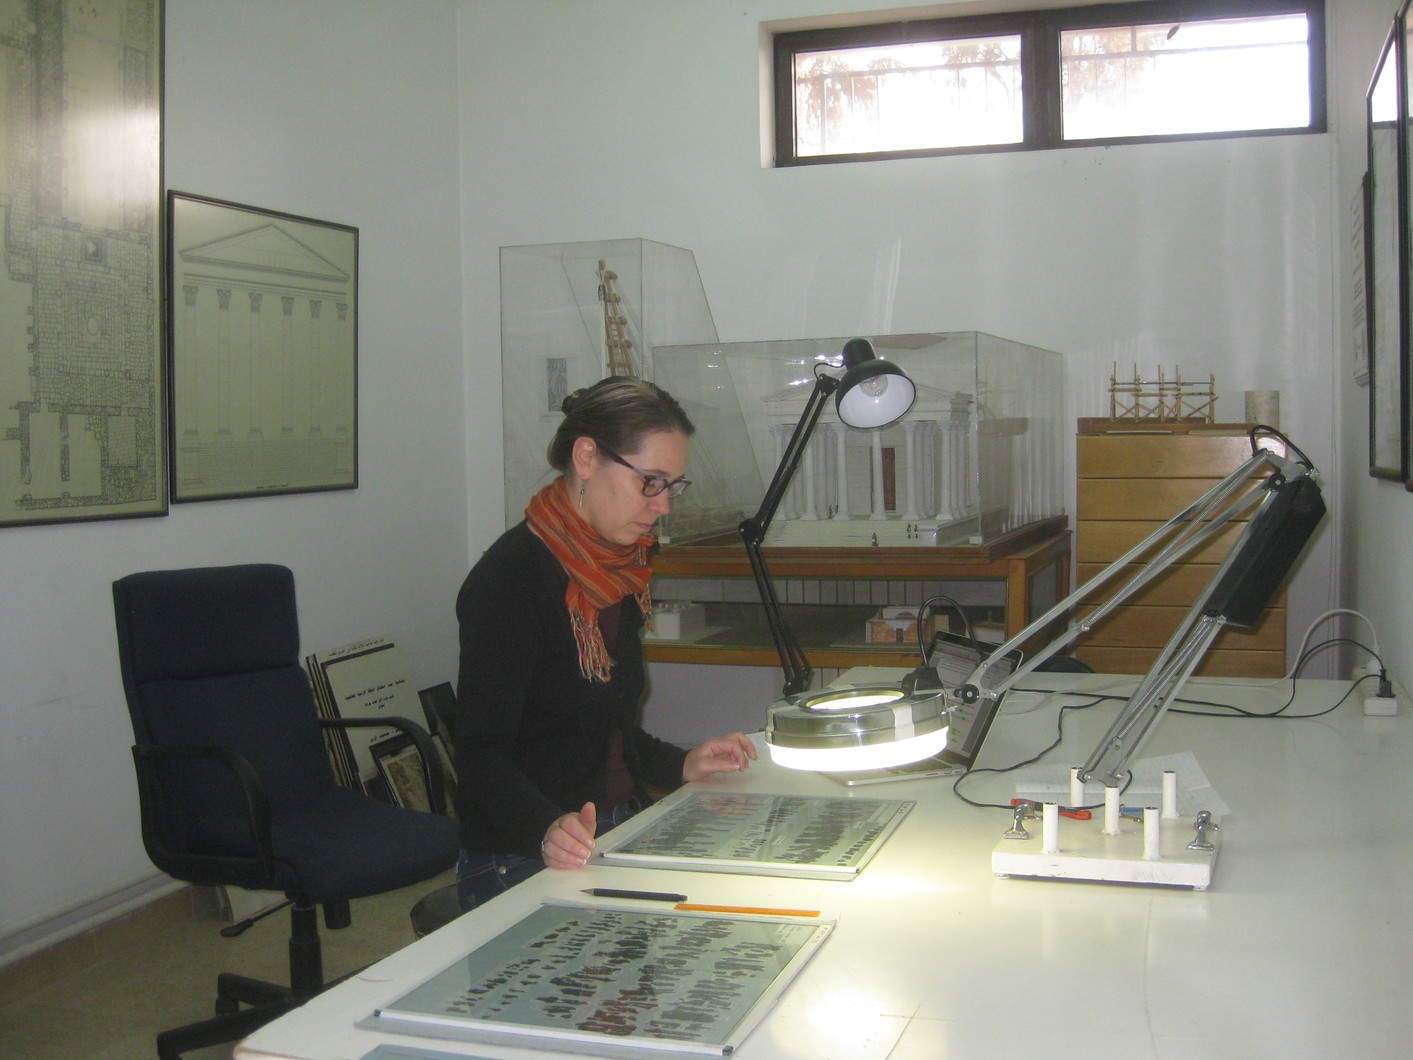 Papyrologists like Marja Vierros of the University of Helsinki (seen here studying the papyri at ACOR in December 2014) continue to analyze the papyri for information about daily affairs in Byzantine Petra. Photo by Barbara A. Porter.